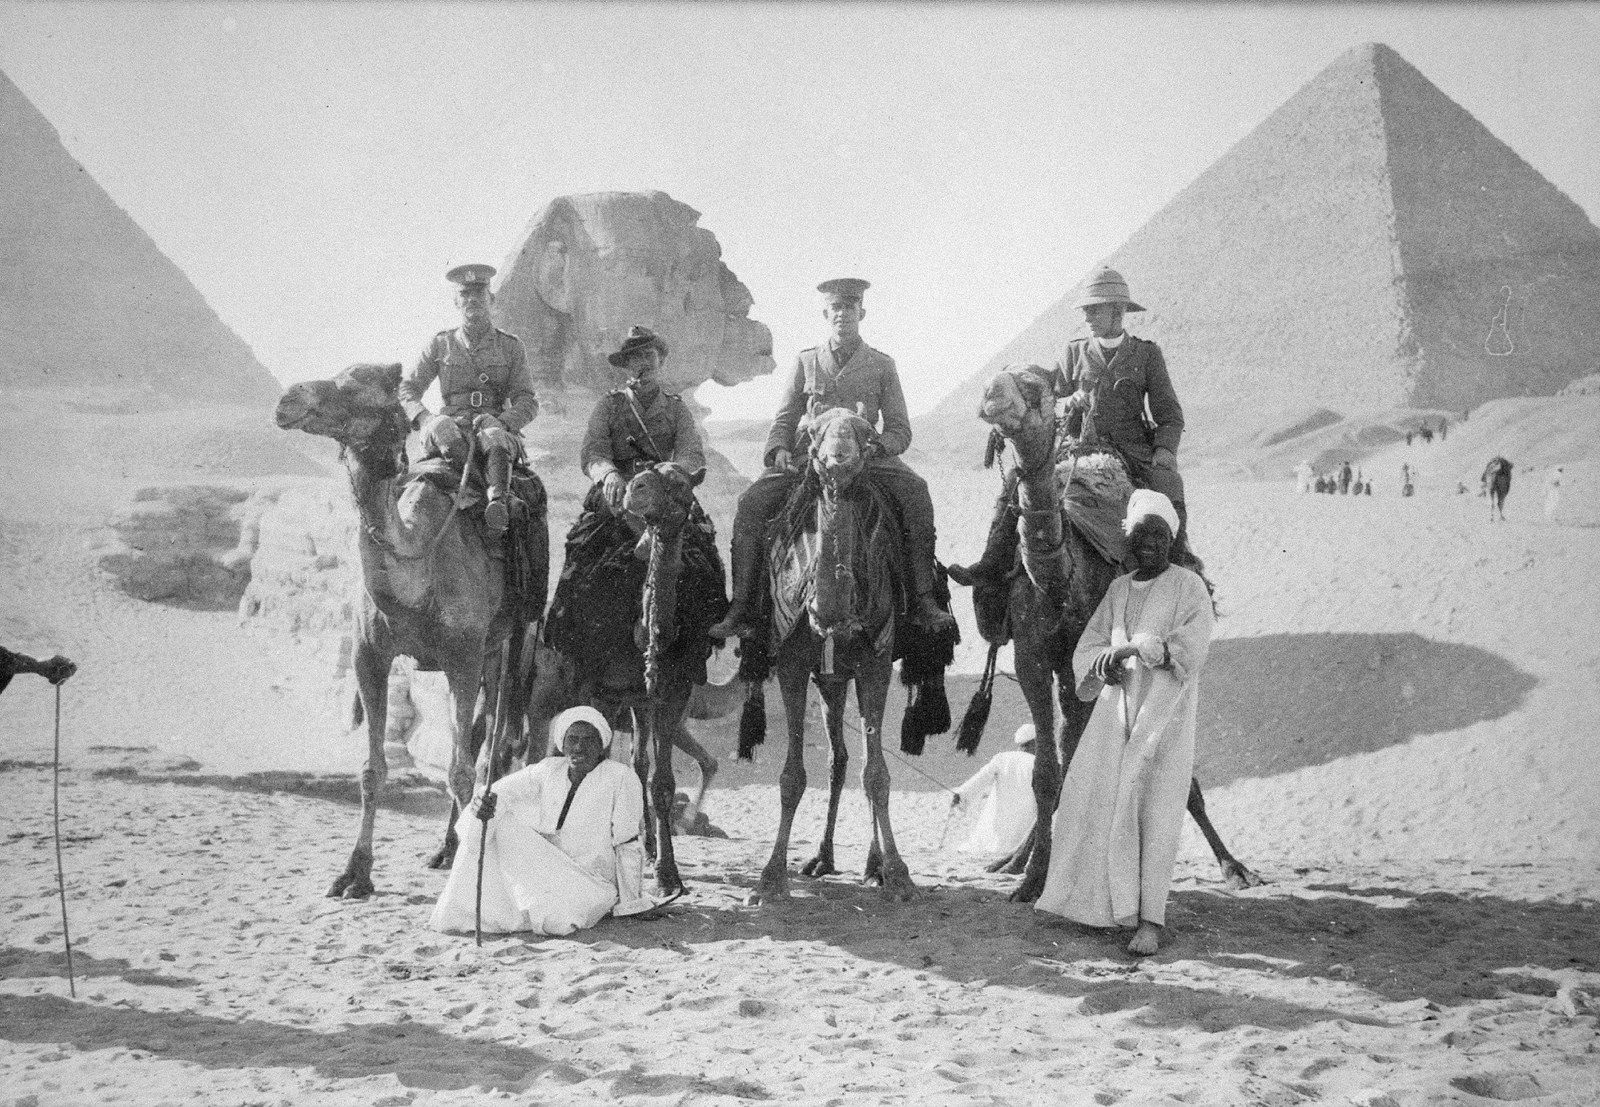 Major Charley, Lieut Norman Pearce, Captain Robertson and Colonel Green. Mena, Eqypt, 1916